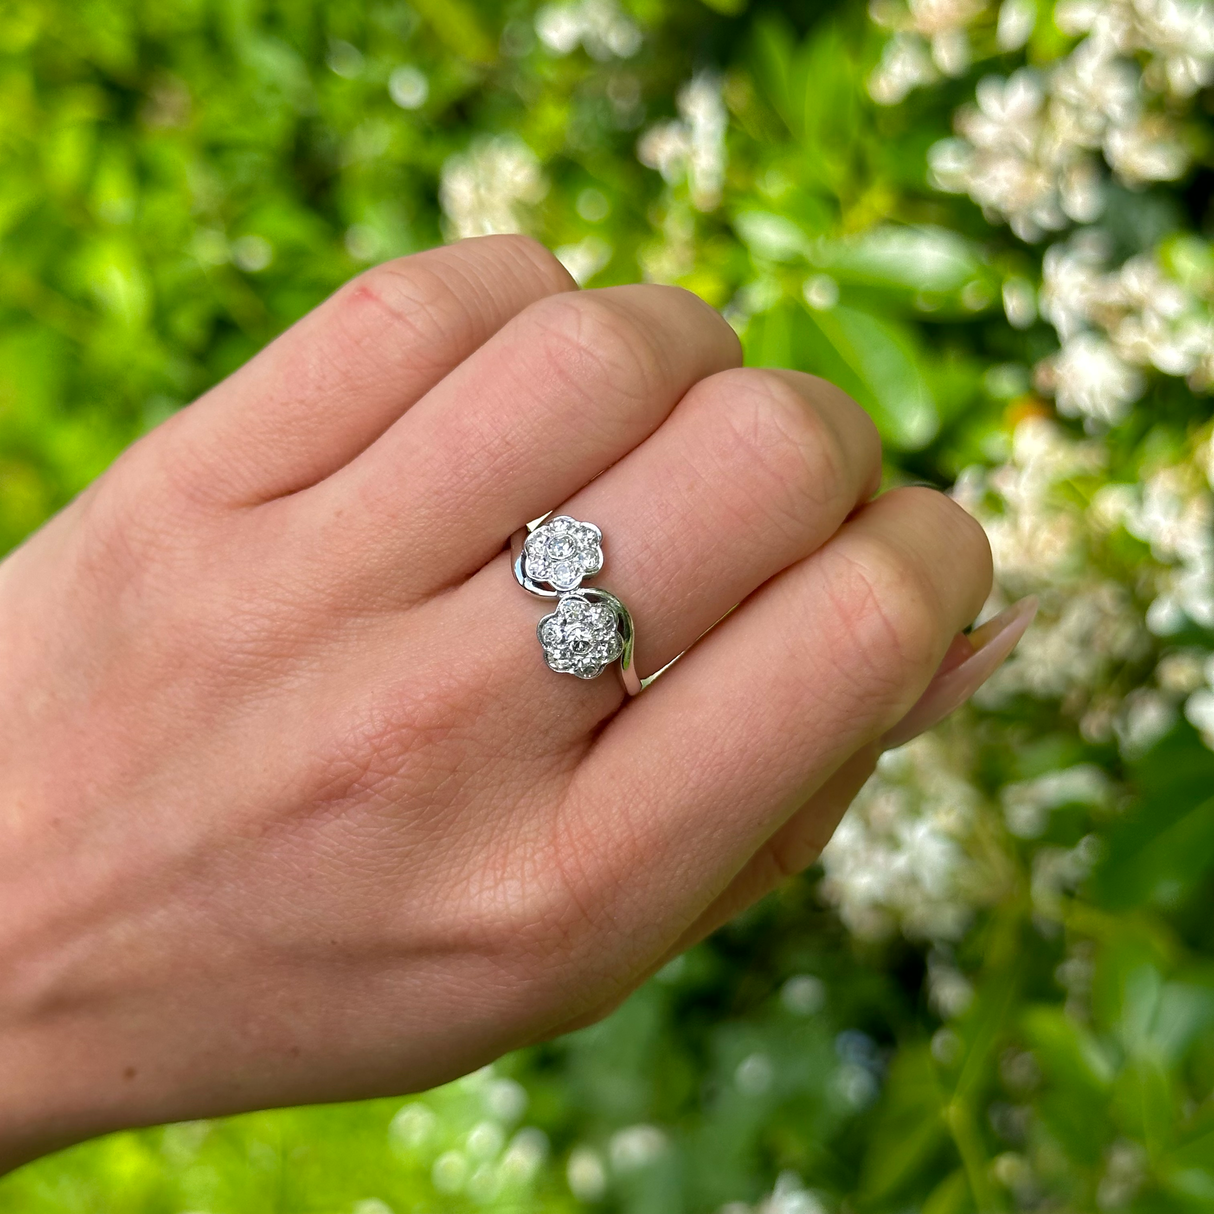 Vintage, 1940s Diamond Cluster Engagement Ring, 18ct White Gold and Platinum worn on hand.